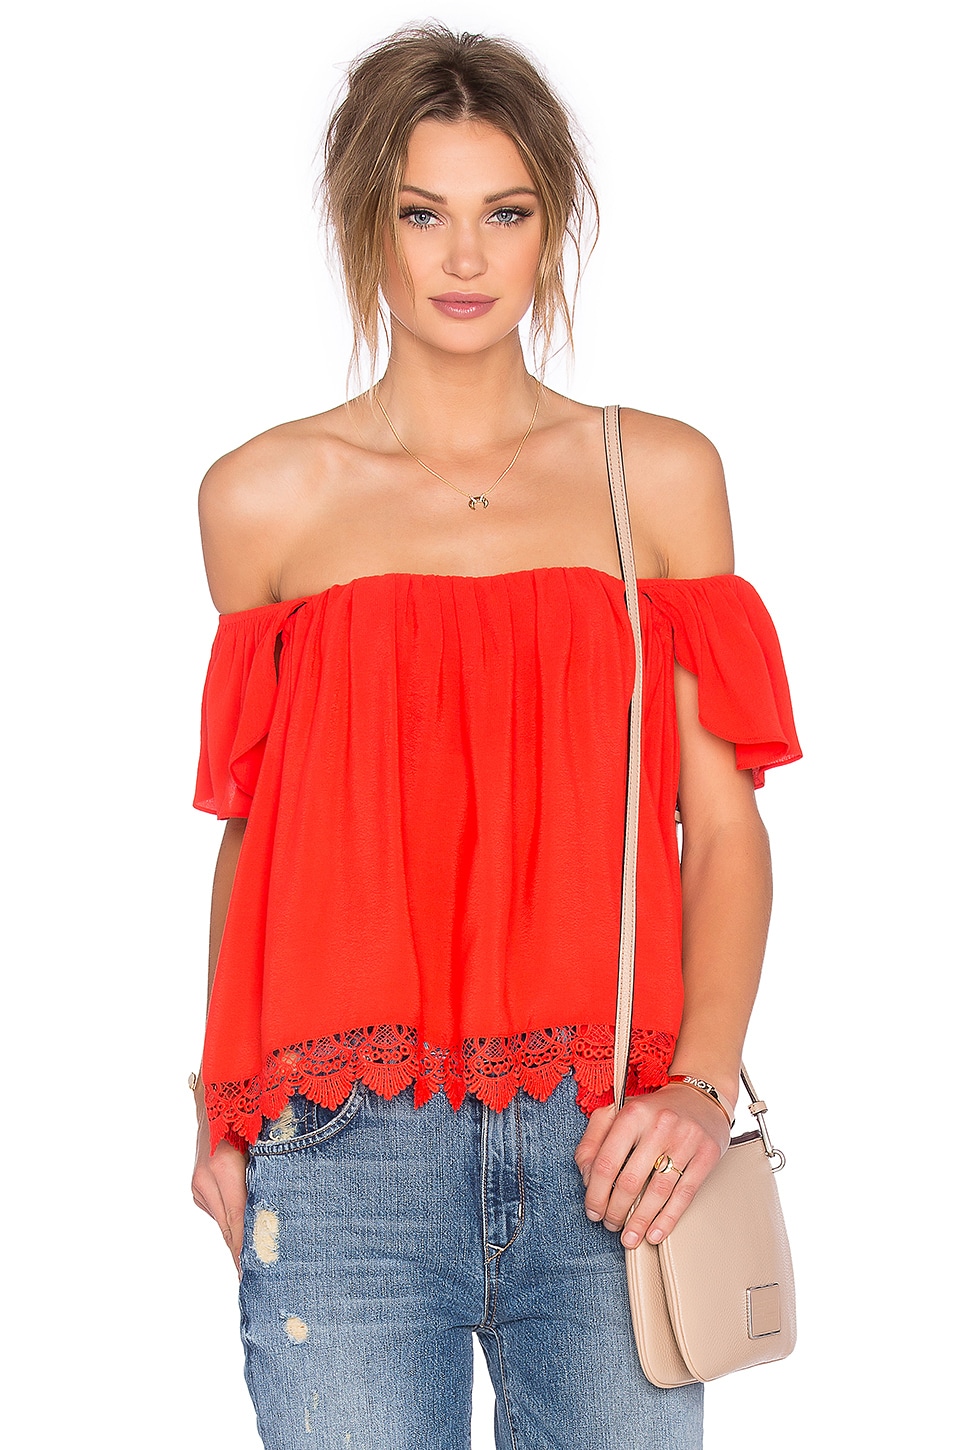 Lovers + Friends x REVOLVE Life's A Beach Top in Red Orange | REVOLVE